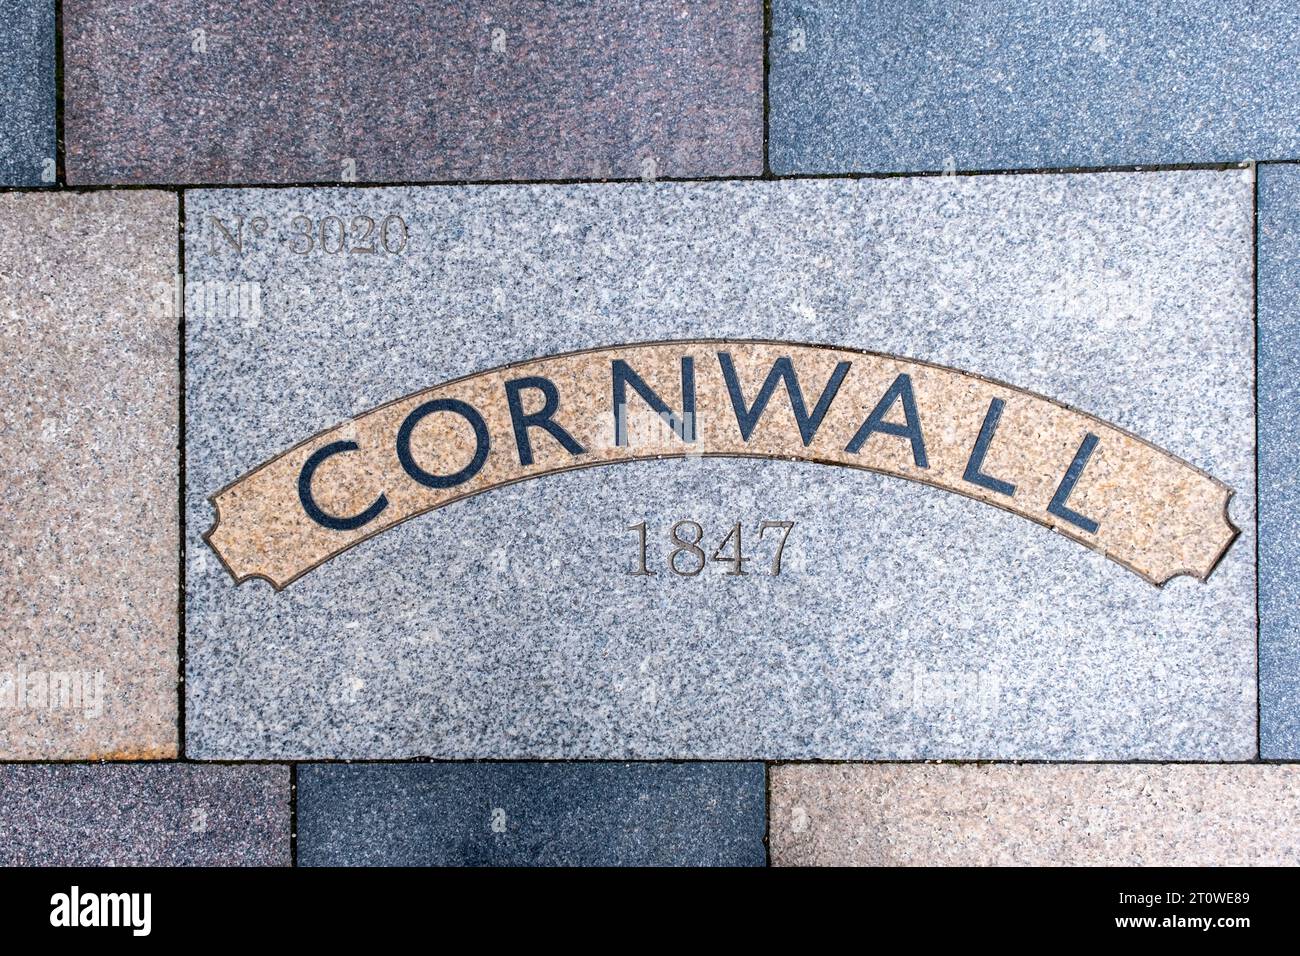 Paving slab in West Street Crewe saying Cornwall, train build at Crewe Works No 3020 in 1847 Stock Photo